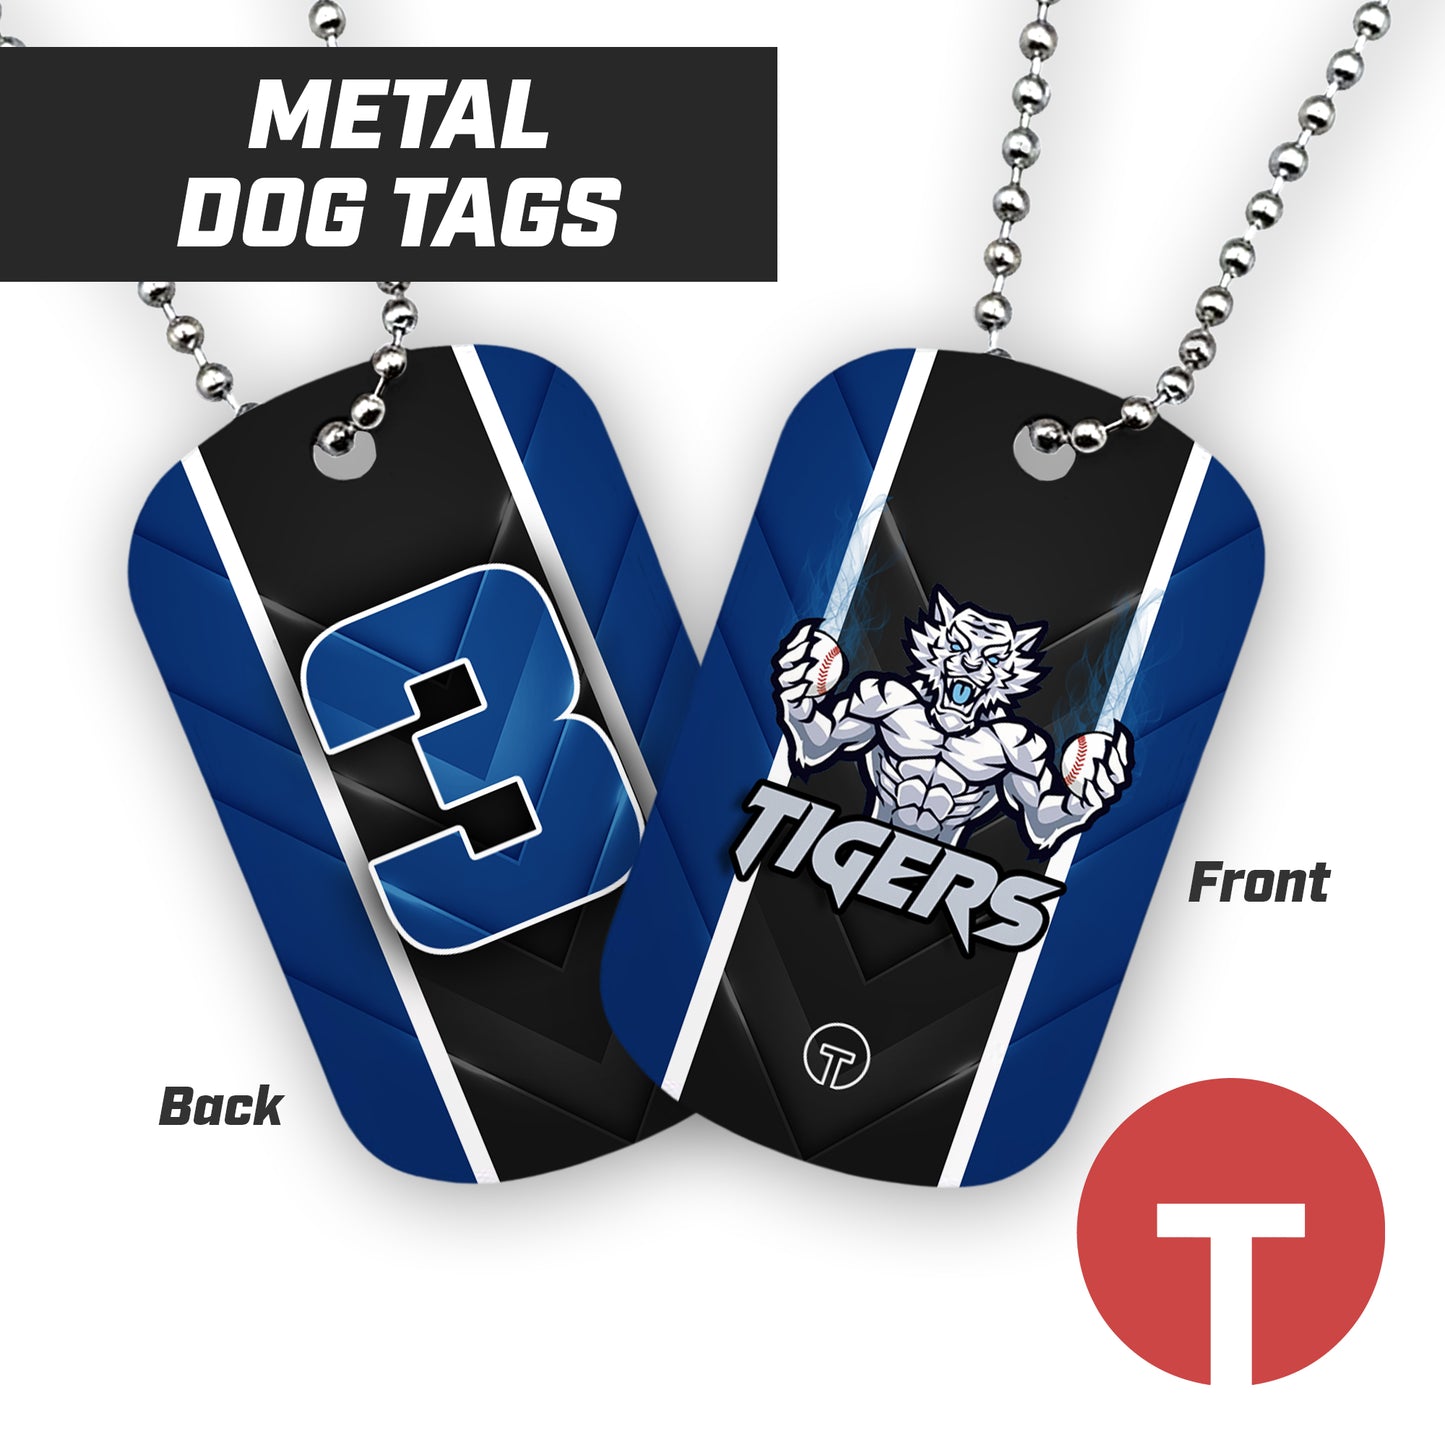 Tigers J Leon - Double Sided Dog Tags